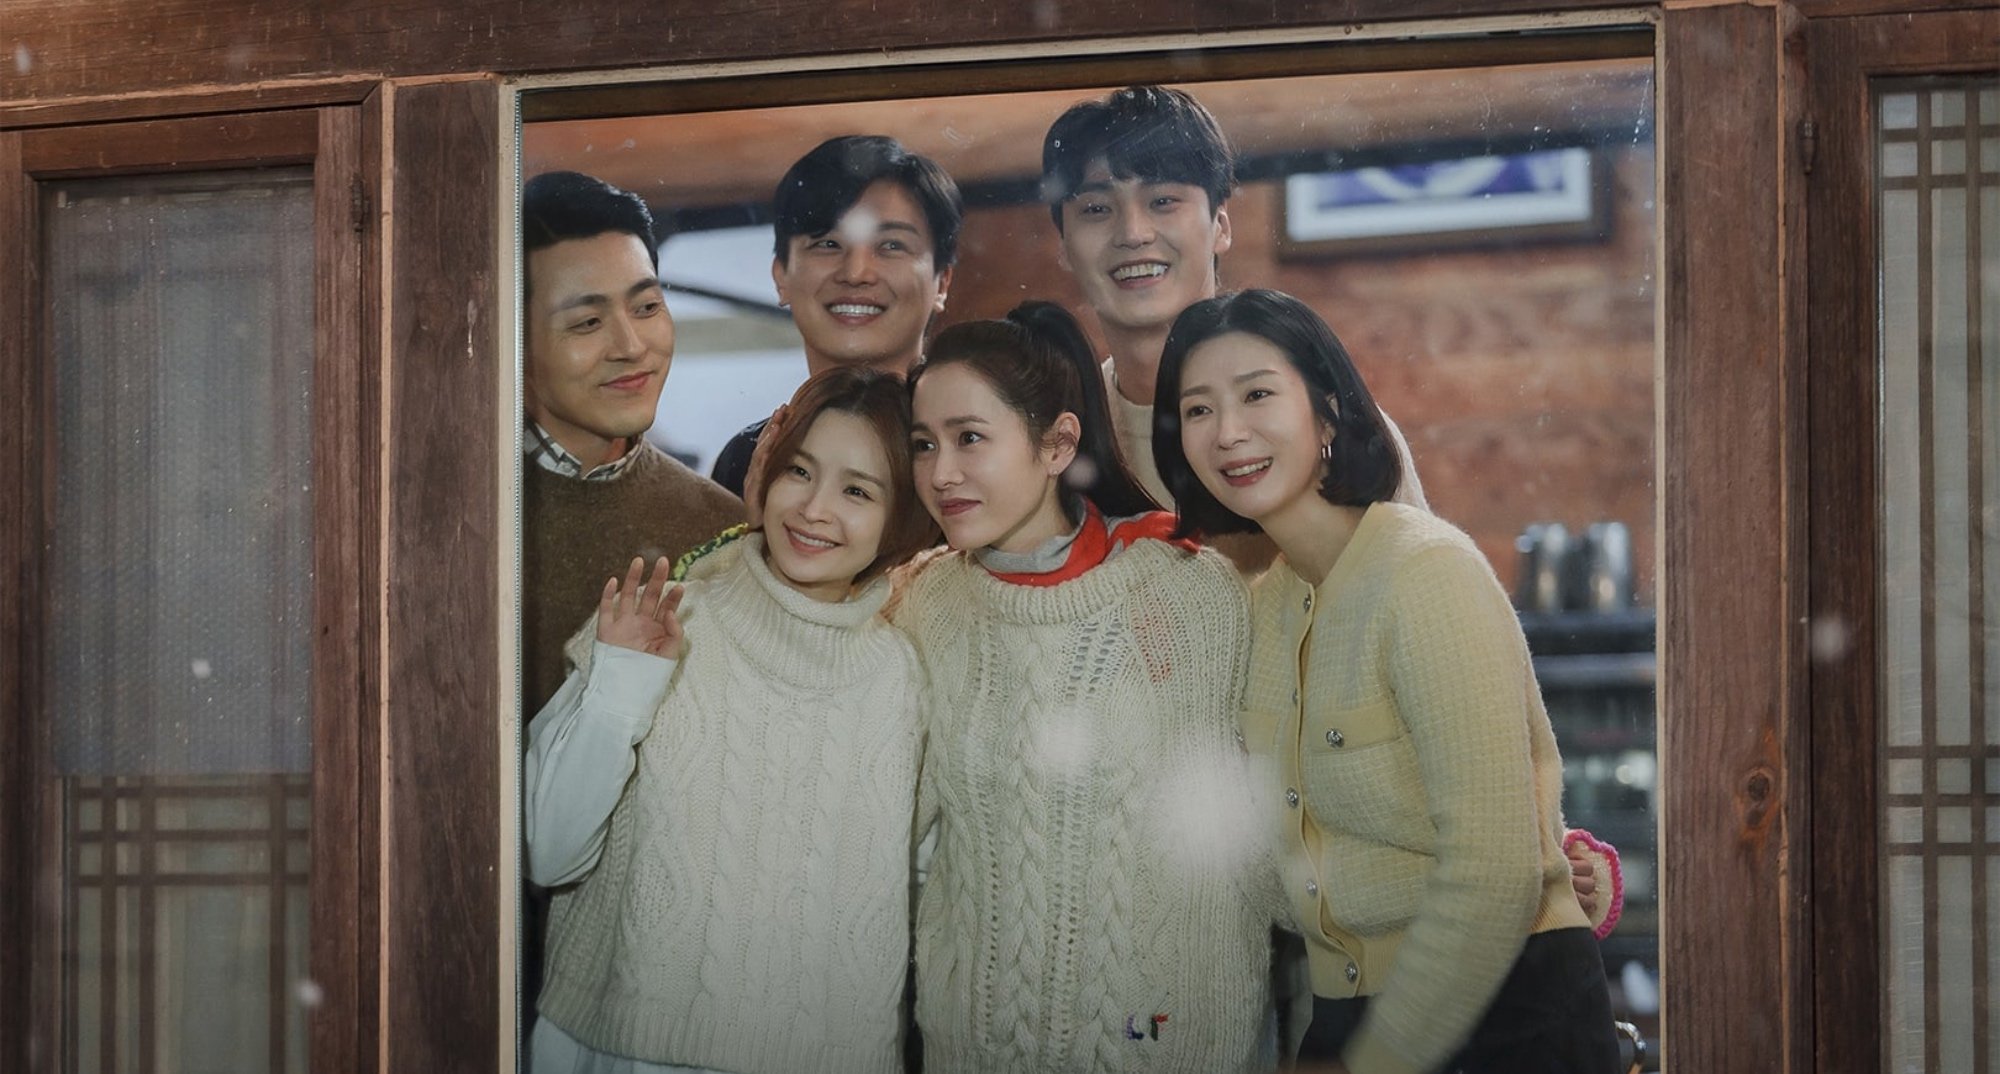 'Thirty-Nine' K-drama main cast huddled together in front of window.